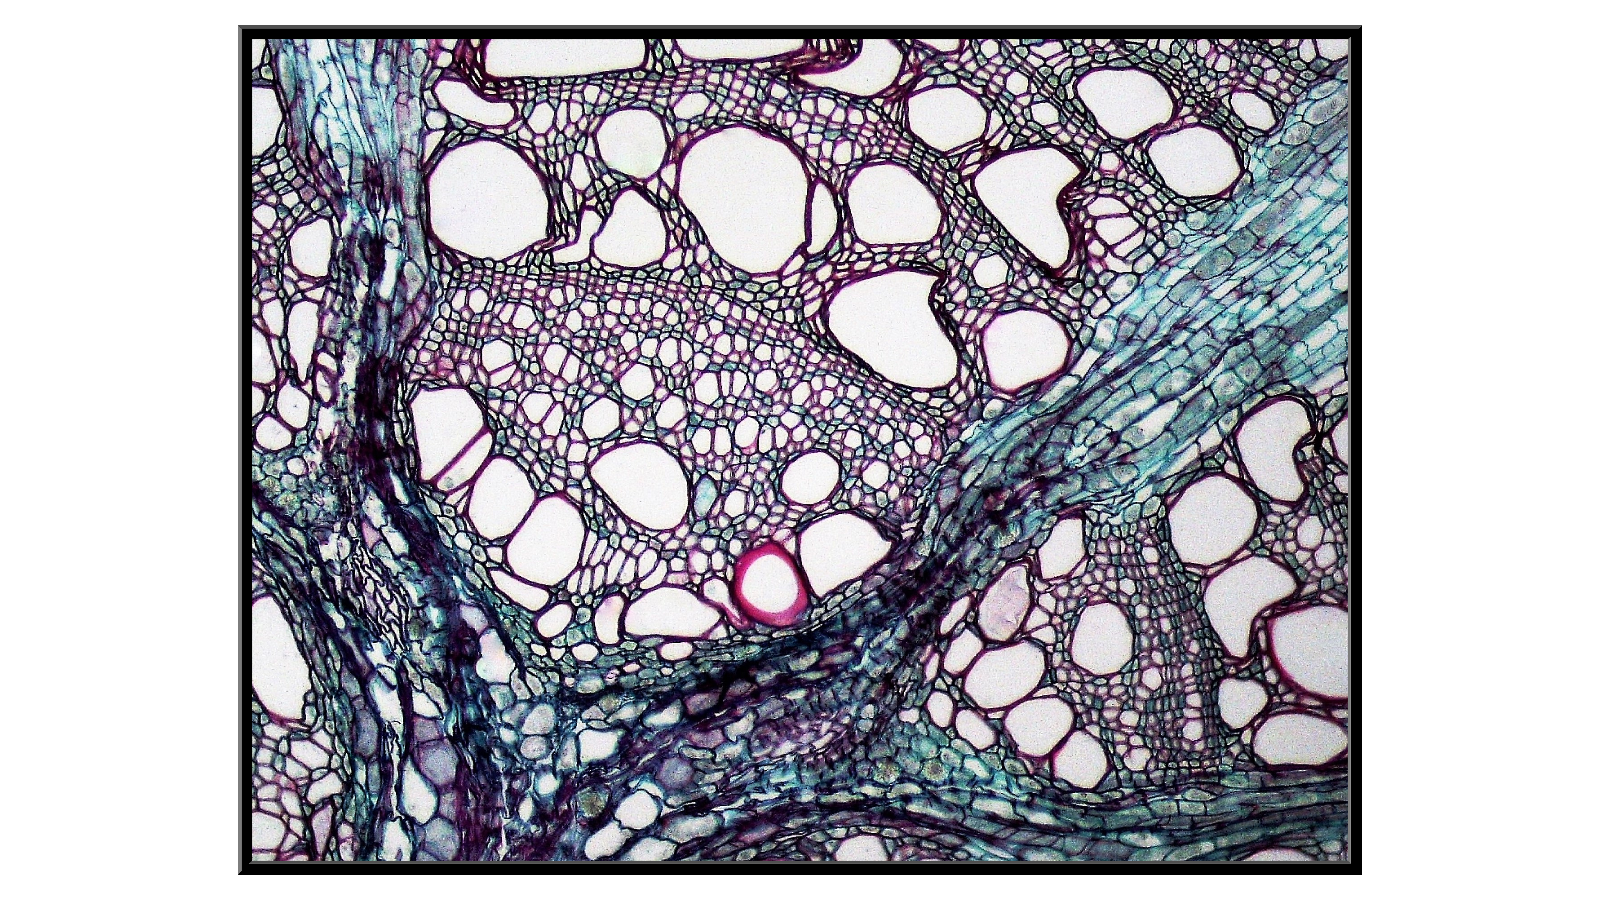 Untitled (photomicrograph of a cross section of Aristolochia vive)